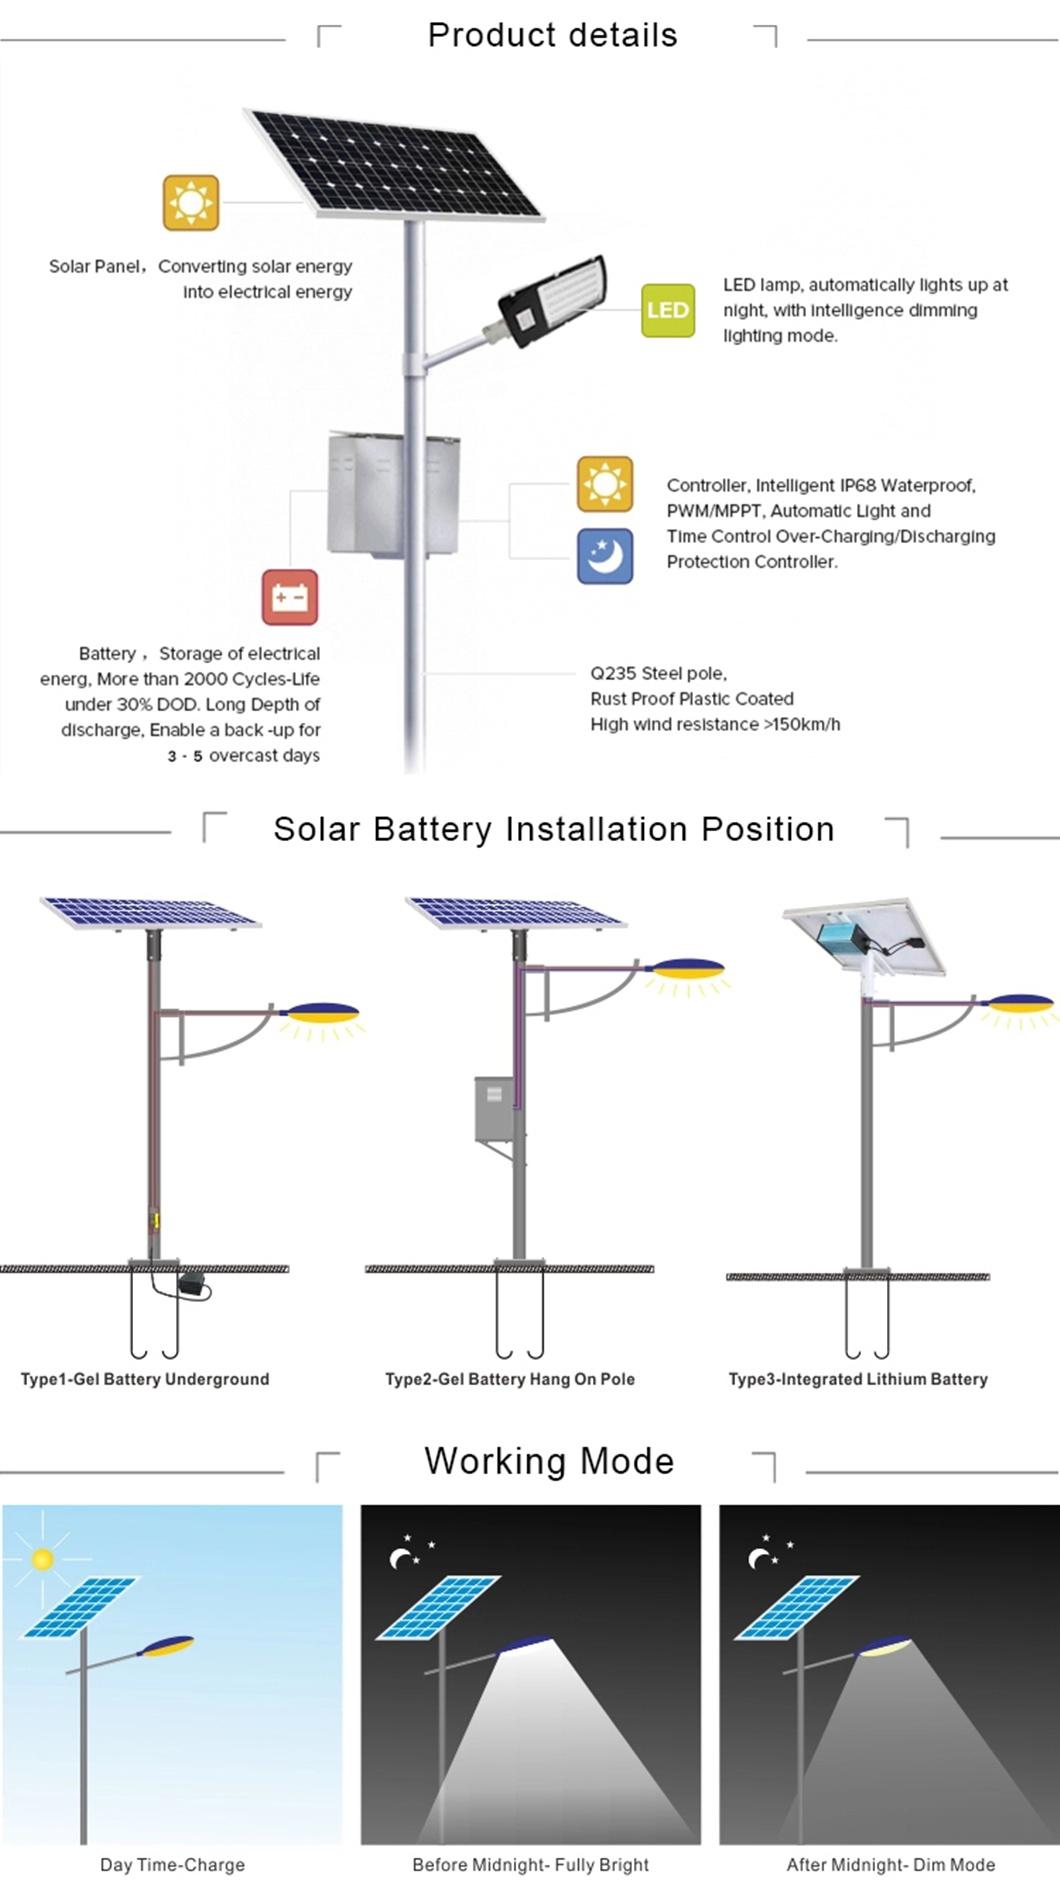 China Factory Separated Design Outdoor Split Power LED Solar Street Light 80W Lithium Battery